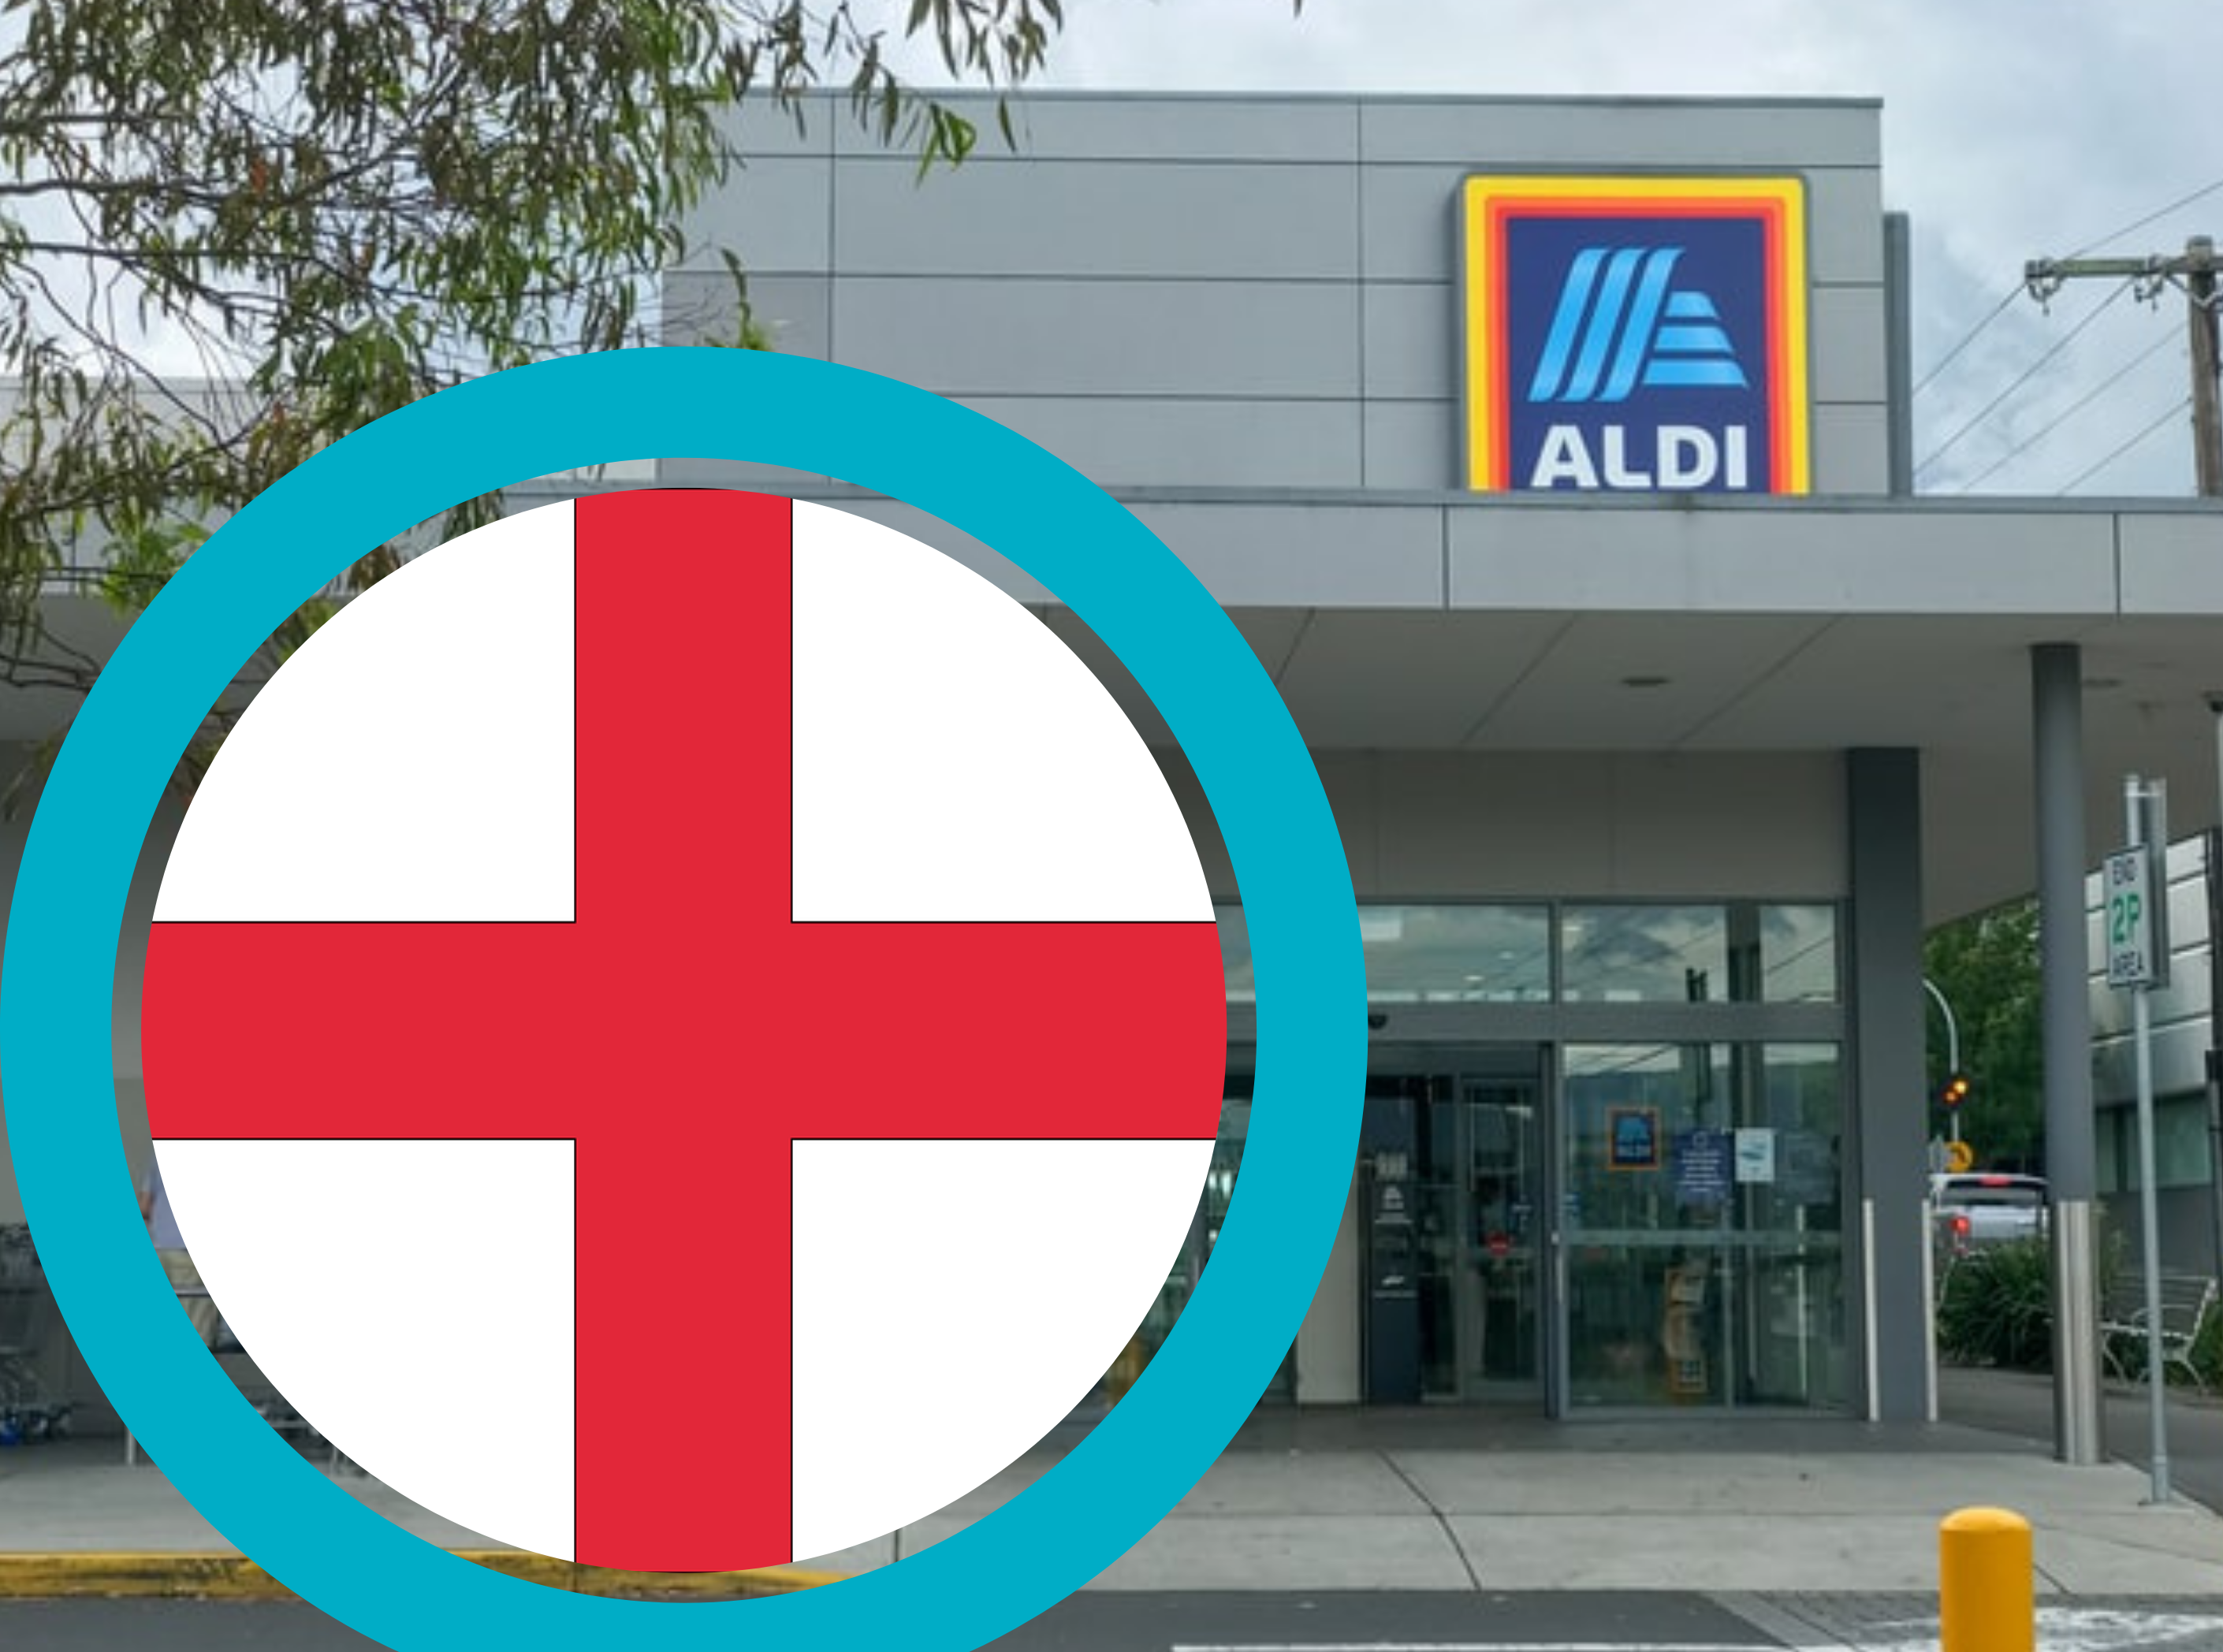 NEWS | Aldi announce change to opening hours this Sunday due to England match